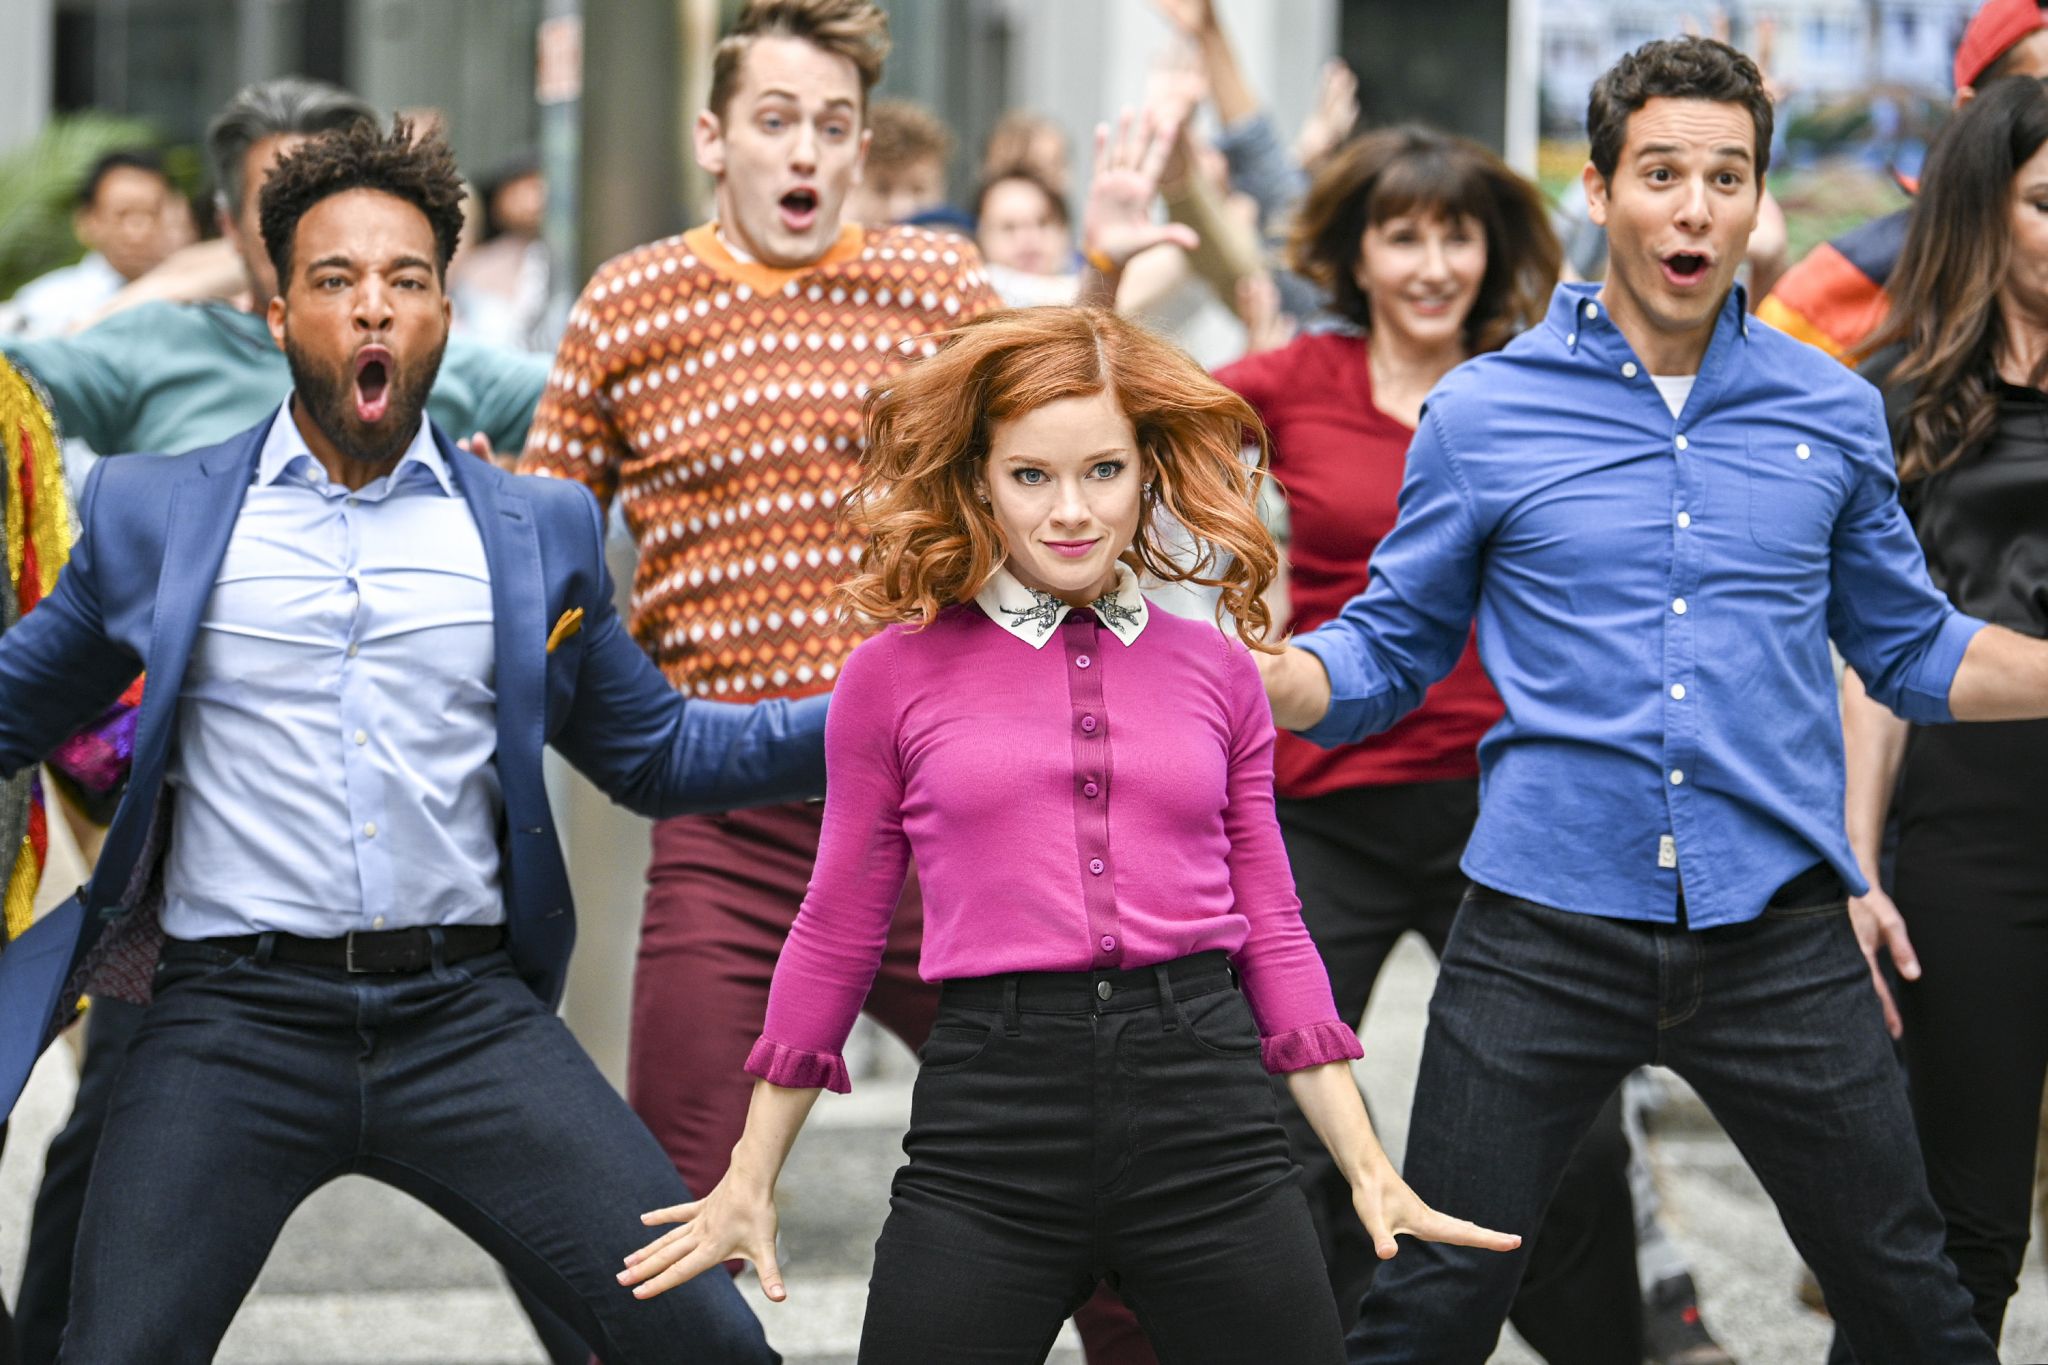 NBC musical set in SF to premiere in January Watch the trailer now